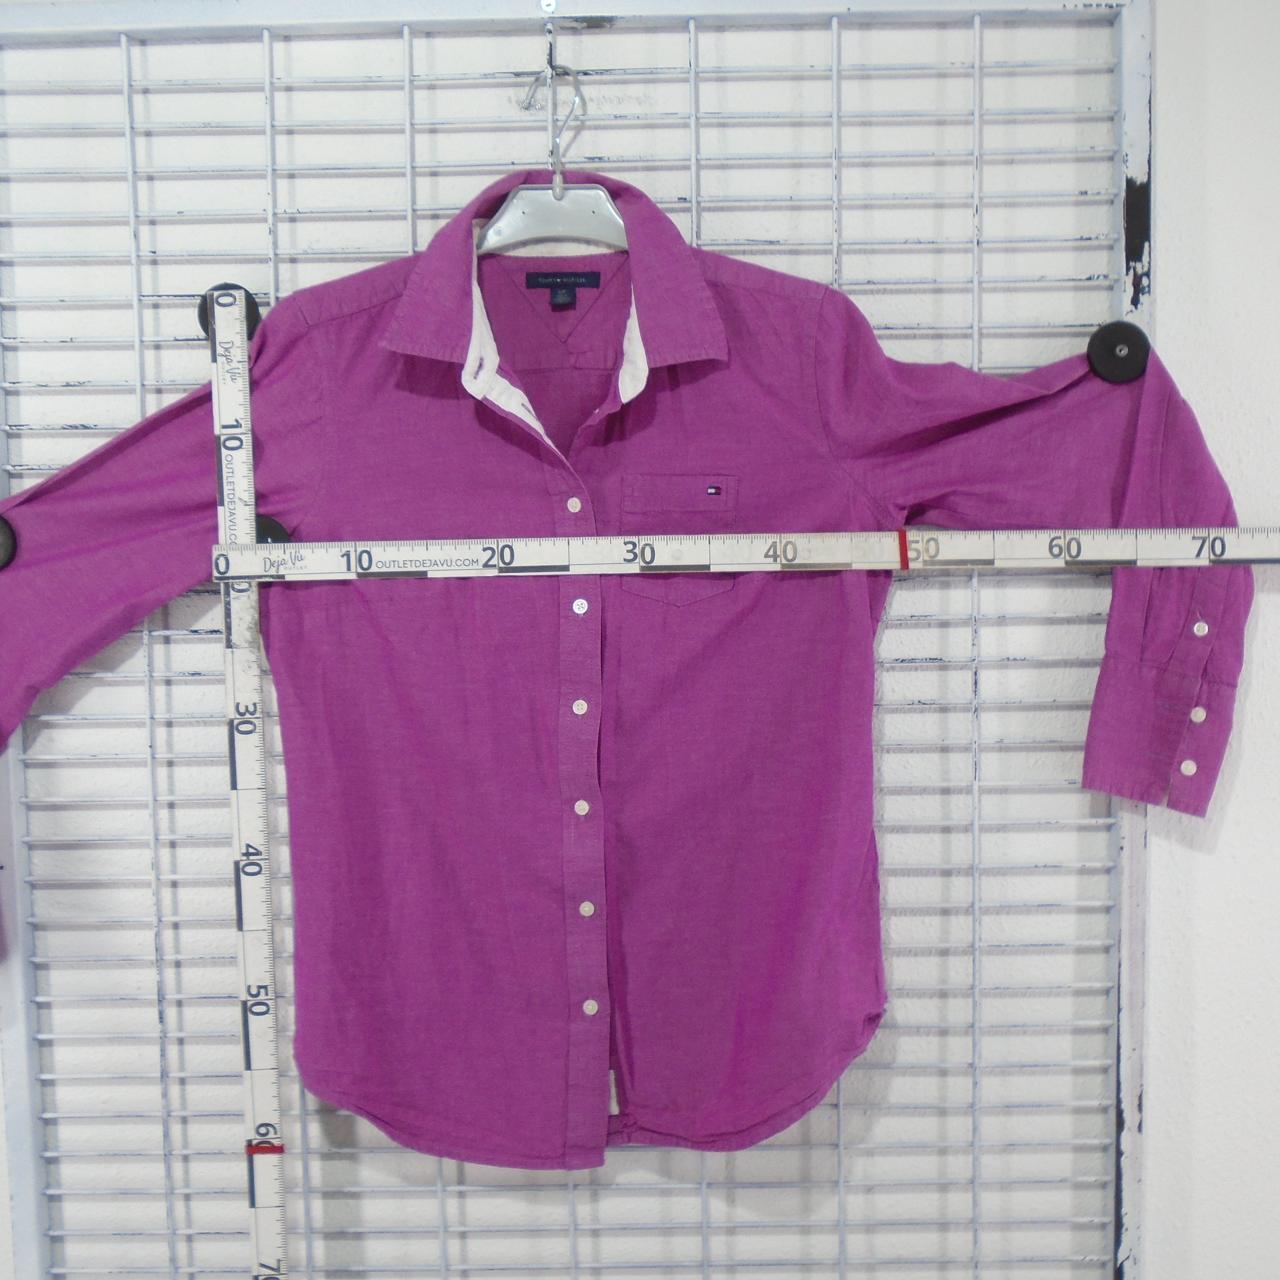 Women's Shirt Tommy Hilfiger. Pink. S. Used. Very good